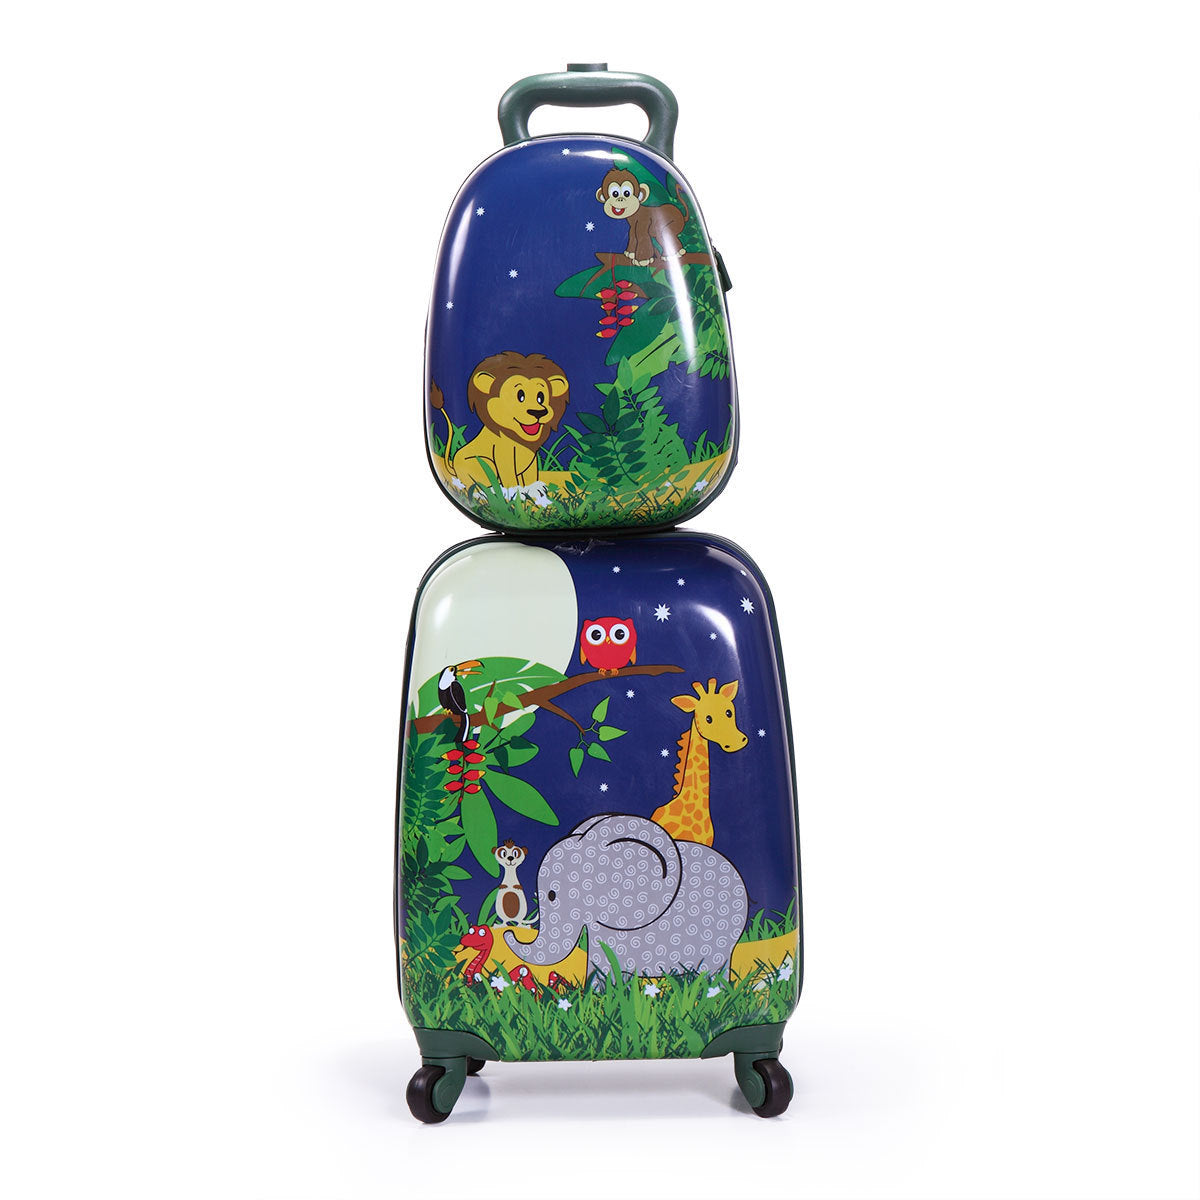 2 PCS Kids Luggage Set, 12" Backpack and 16" Spinner Case with 4 Universal Wheels, Travel Suitcase for Boys Girls,Navy Blue with Animal Patterns